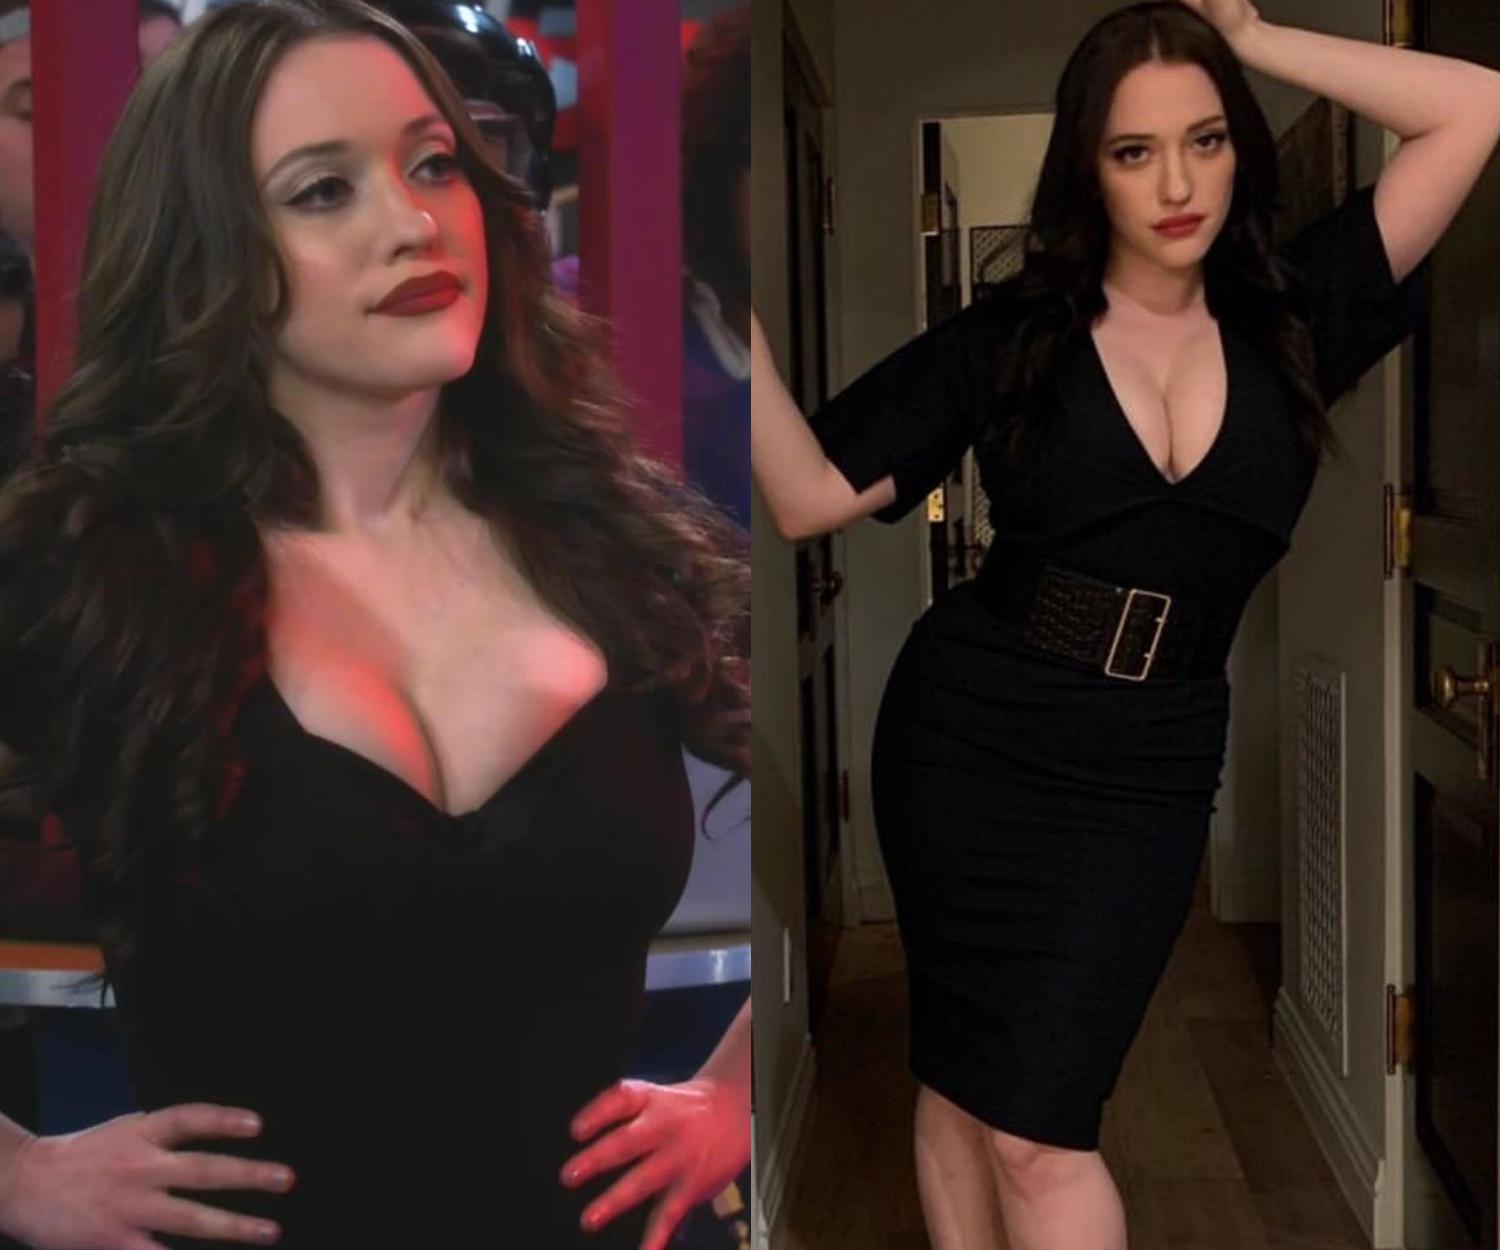 Kat Dennings has curves in all the right places